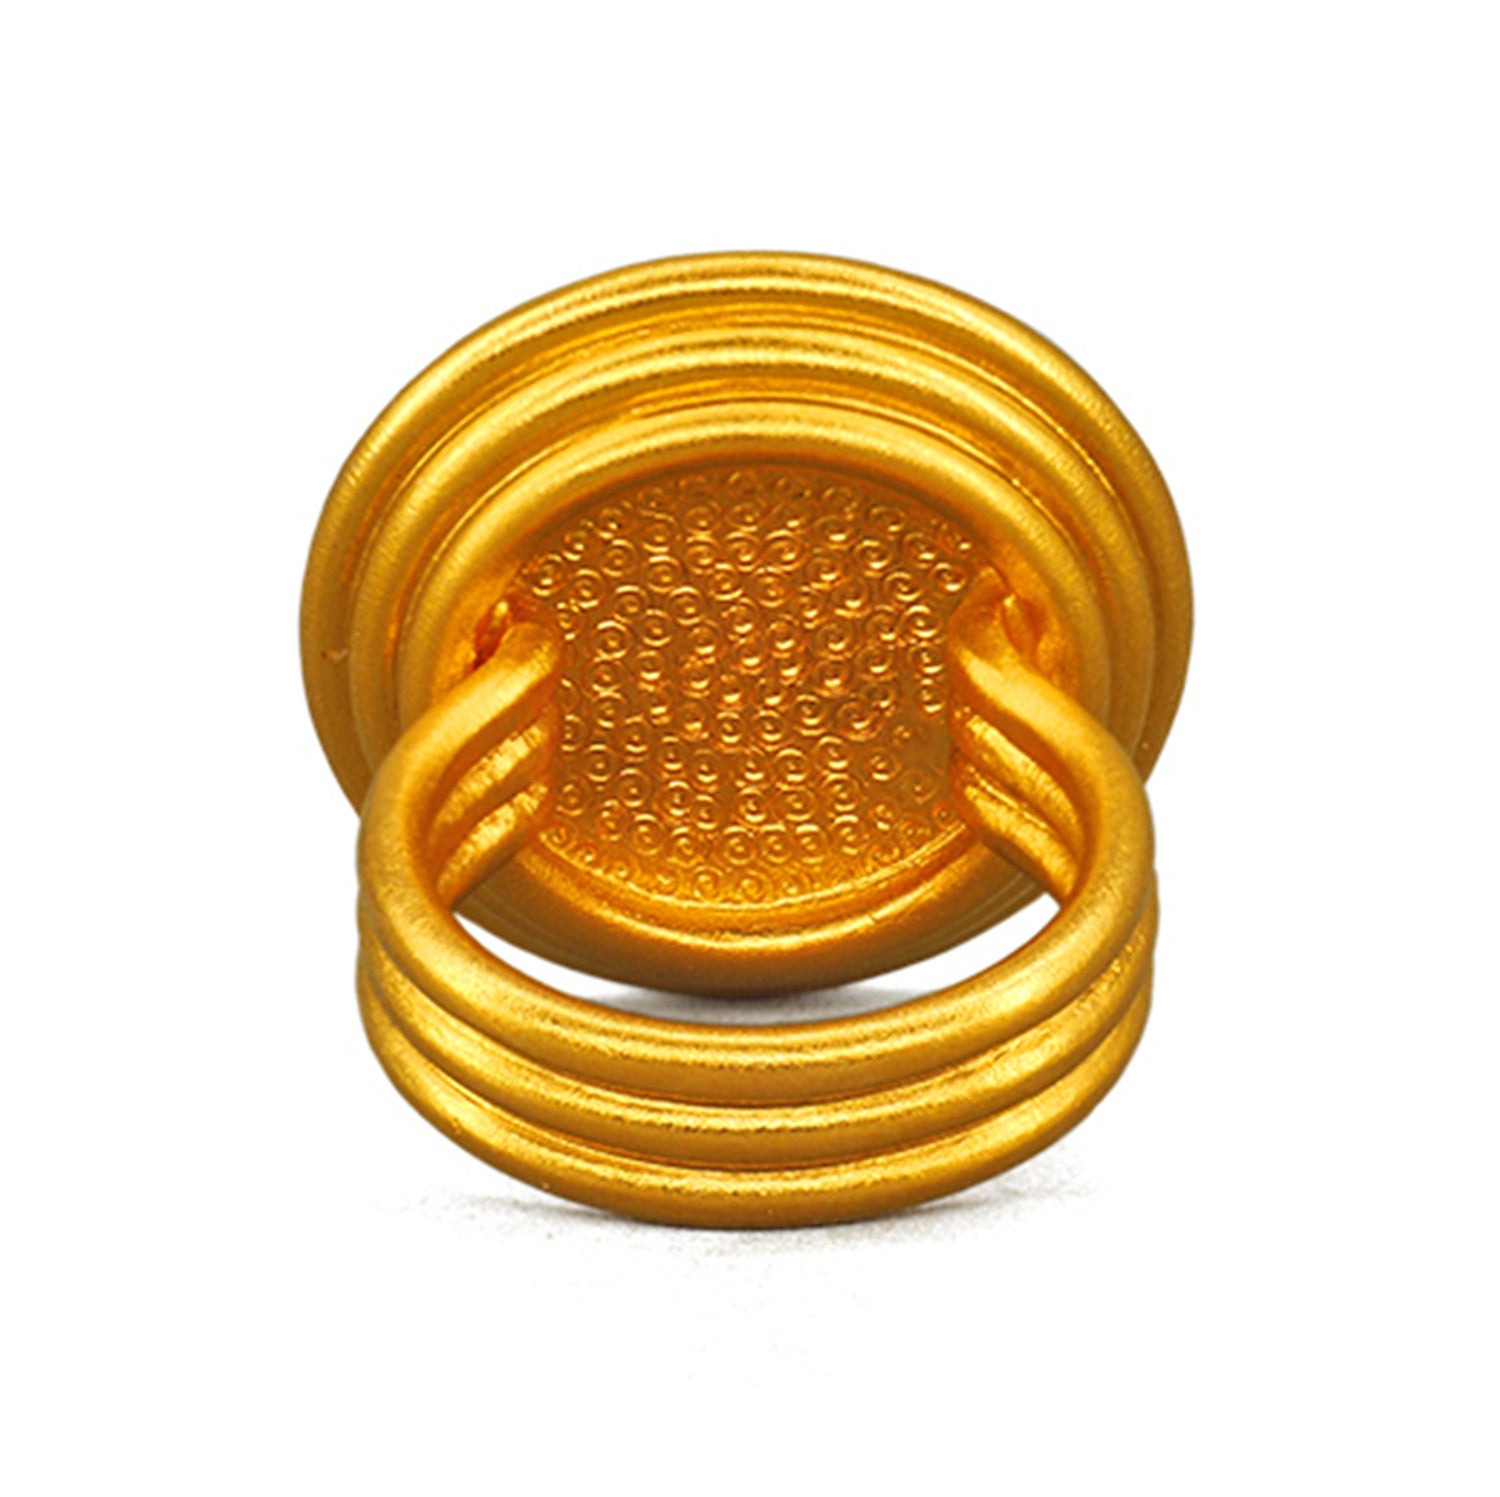 EVECOCO Full Gold Ring Hand Forging With Sculpted Reliefs,Gemstone